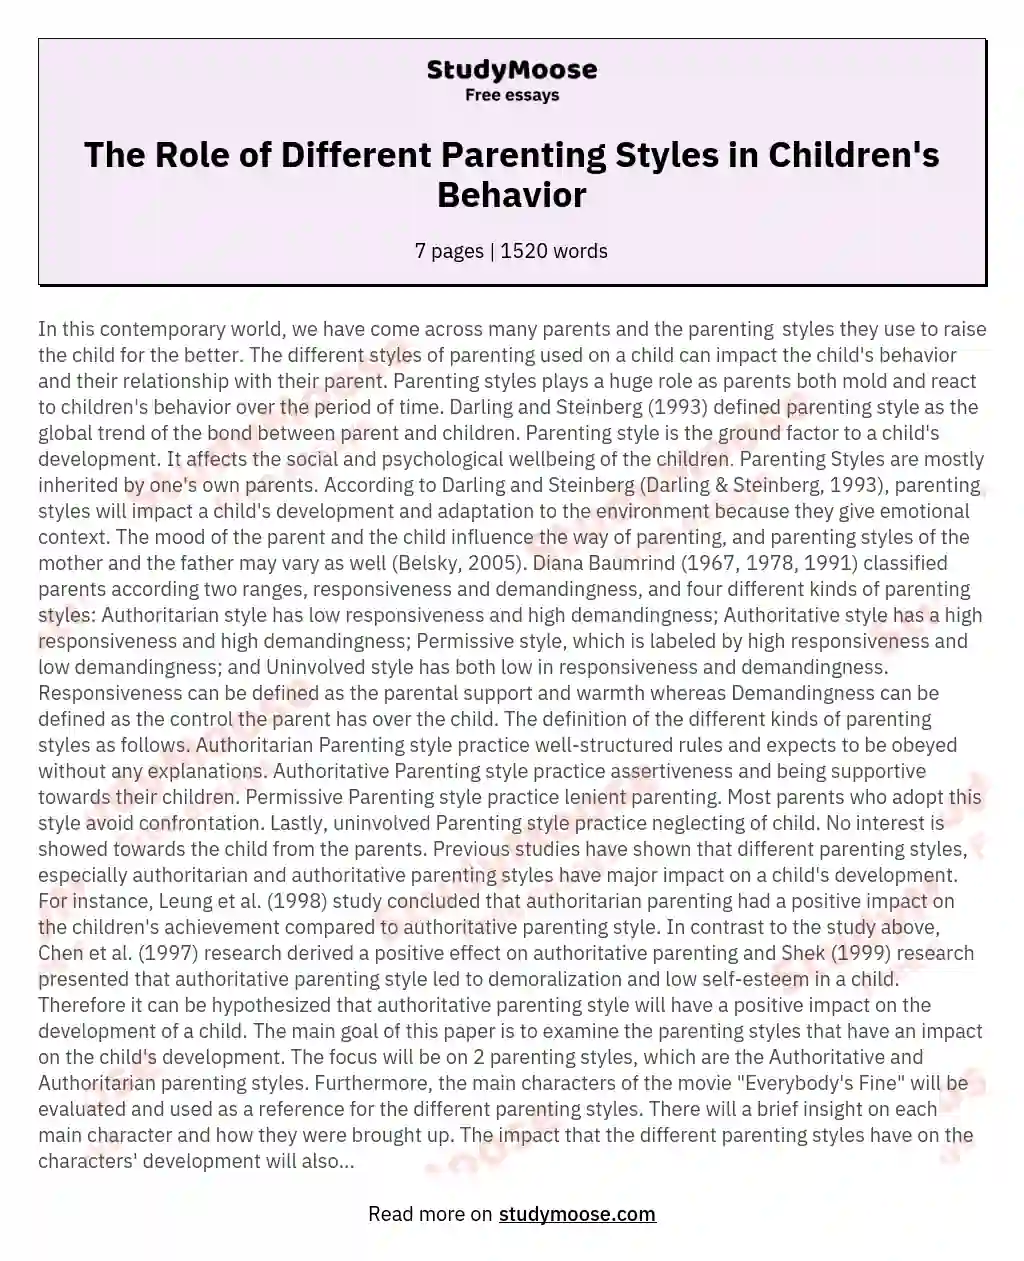 The Role of Different Parenting Styles in Children's Behavior essay